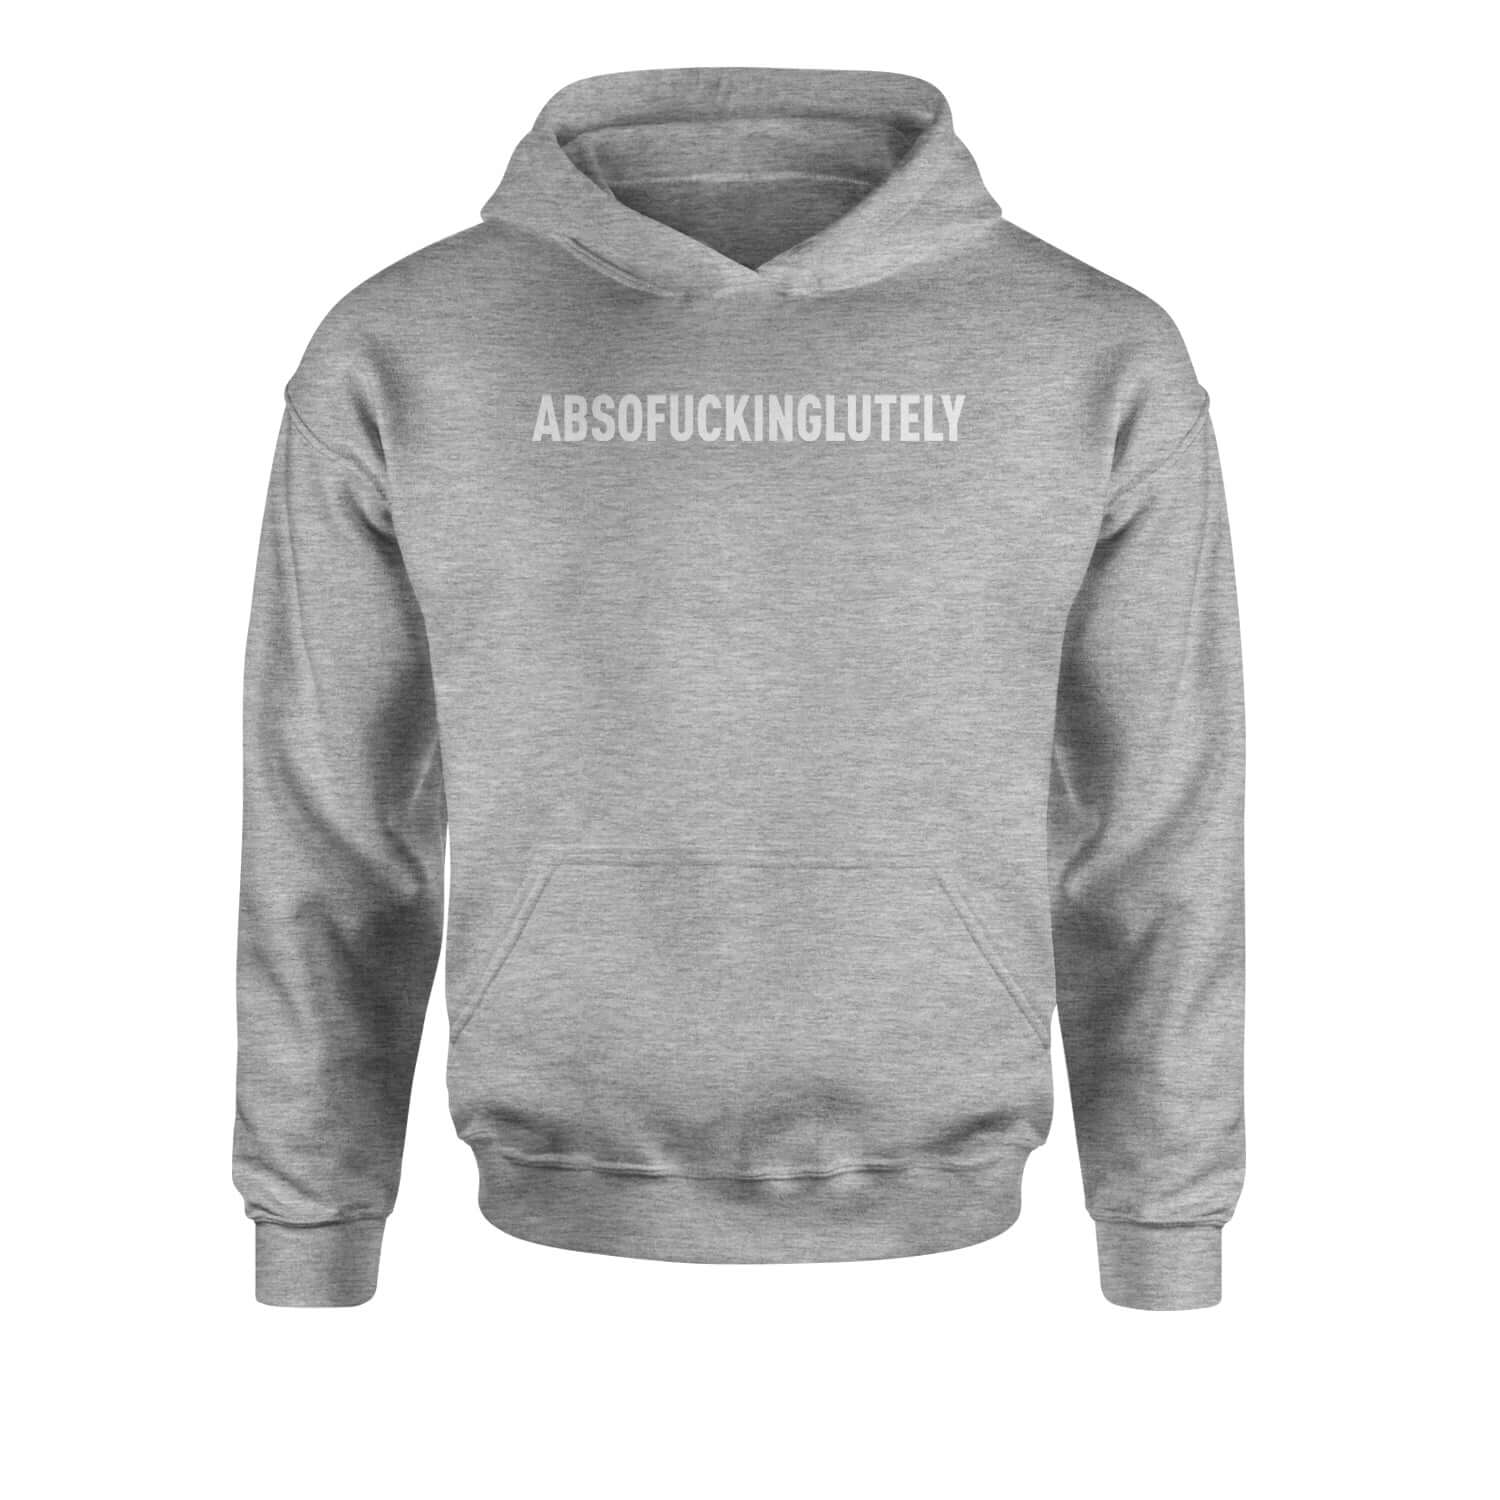 Abso f-cking lutely Youth-Sized Hoodie funny, shirt by Expression Tees